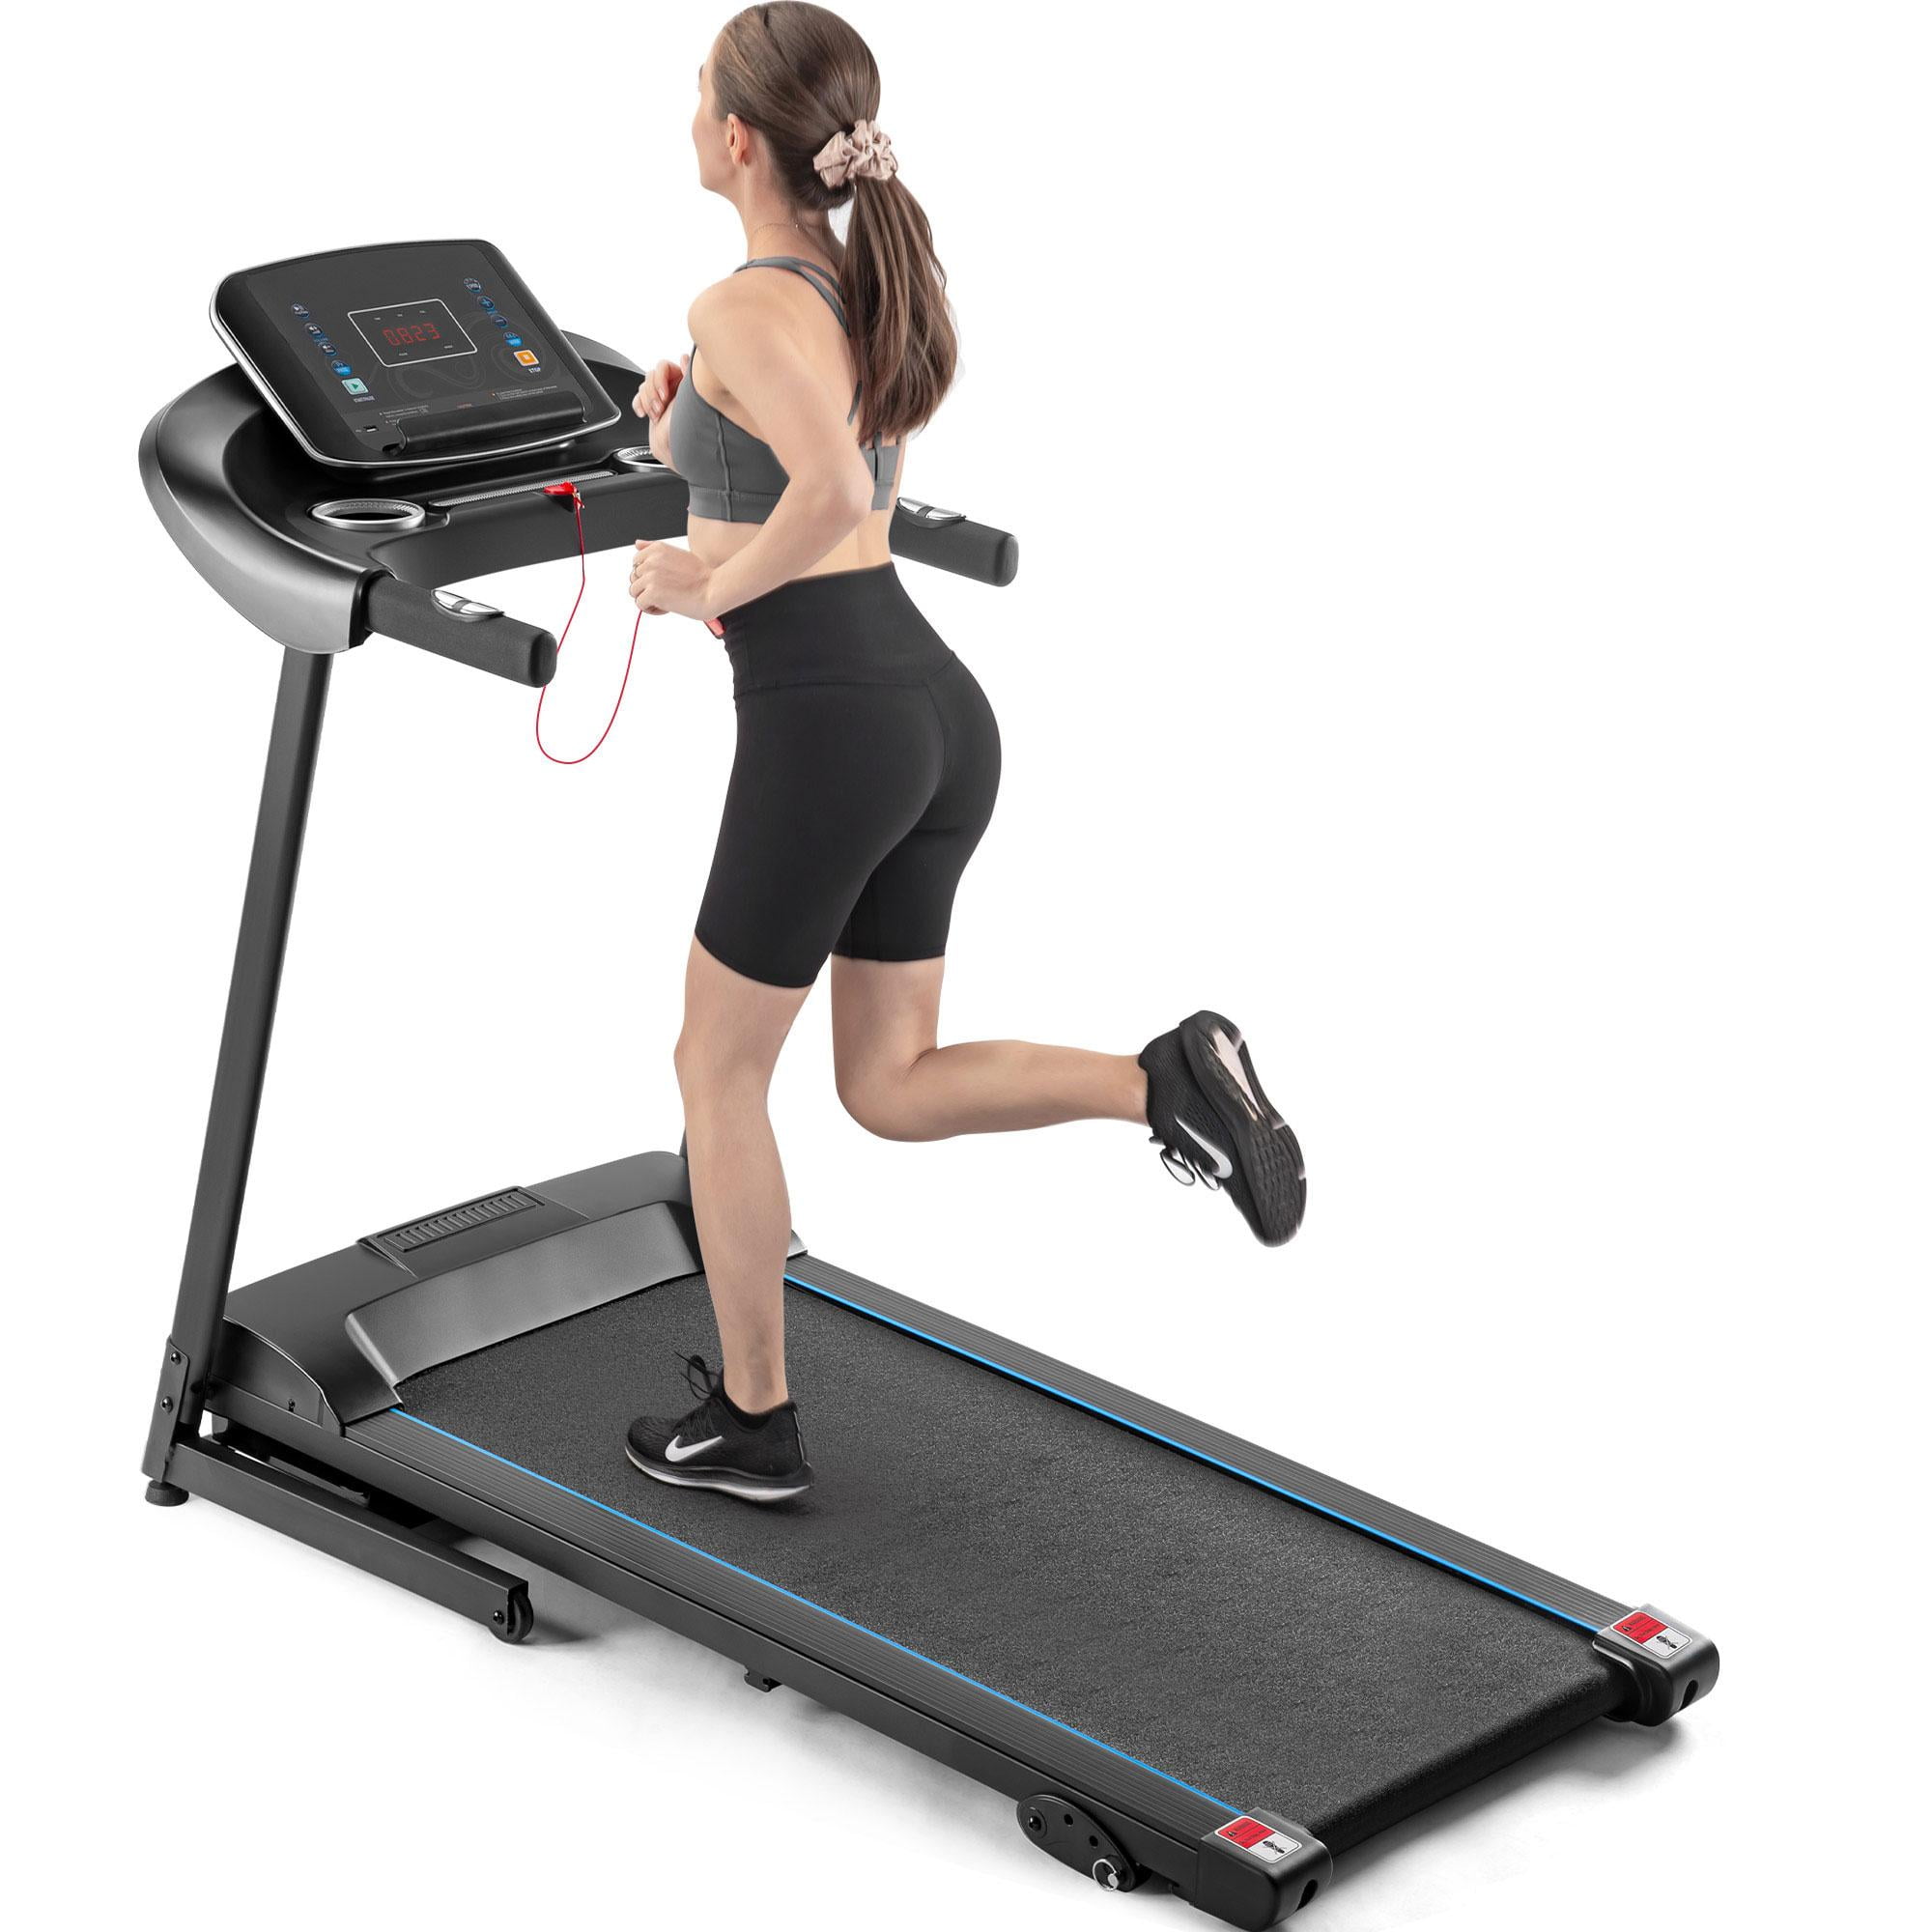 ❤Folding Manual Treadmill Working Machine Cardio Fitness Exercise Incline Home 